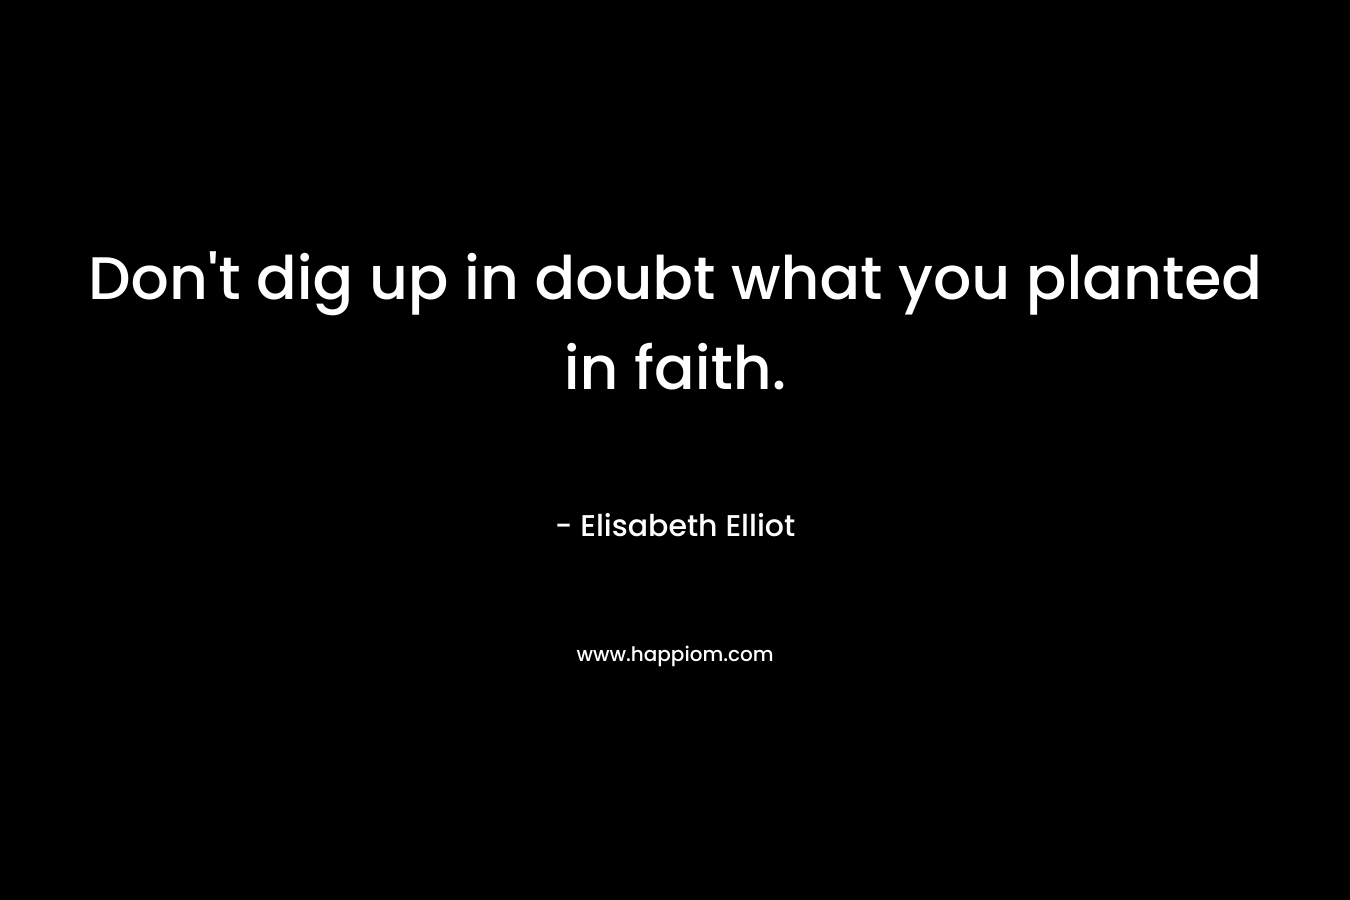 Don’t dig up in doubt what you planted in faith. – Elisabeth Elliot